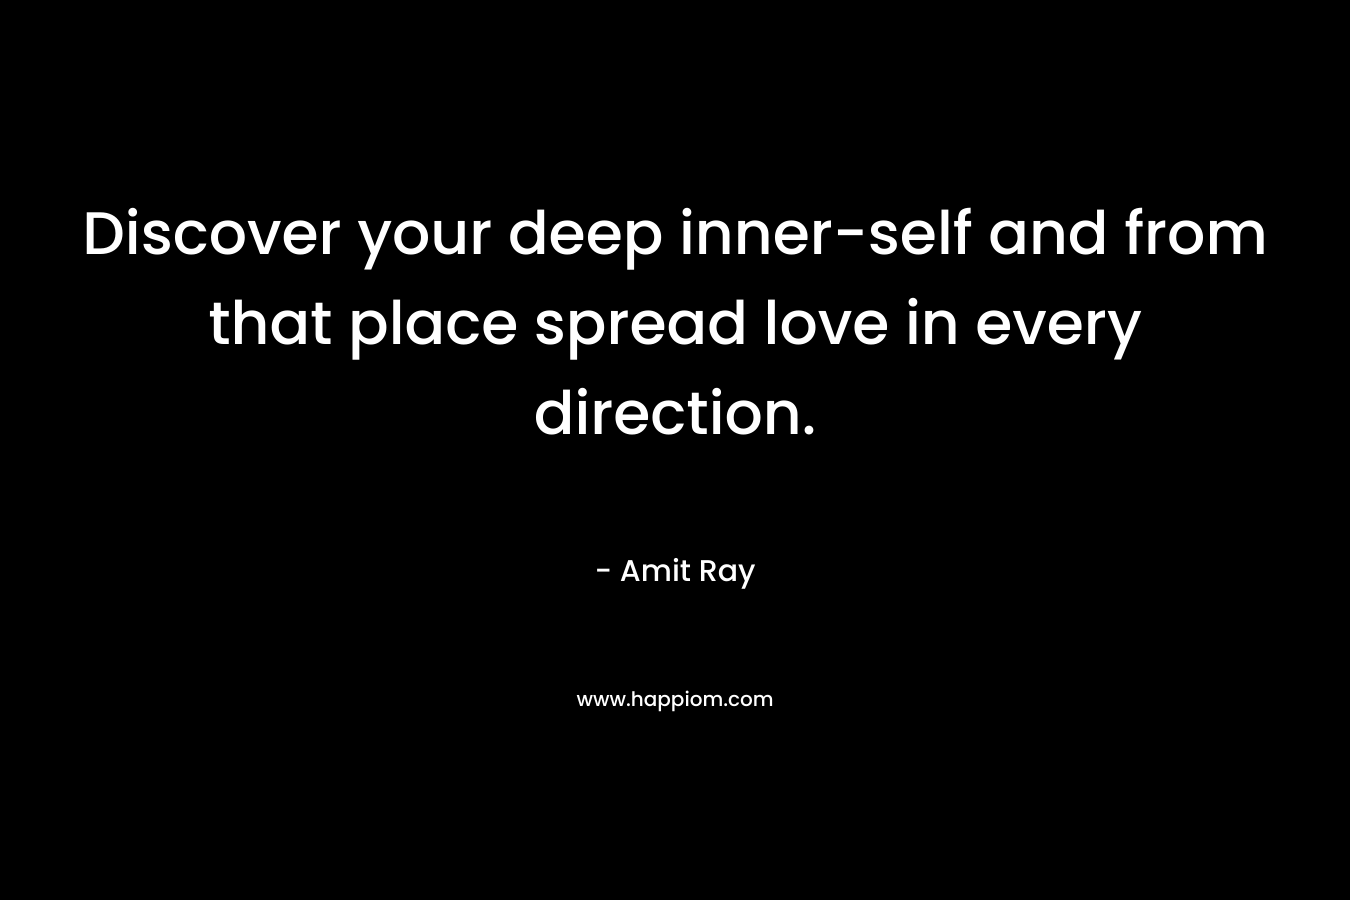 Discover your deep inner-self and from that place spread love in every direction. – Amit Ray